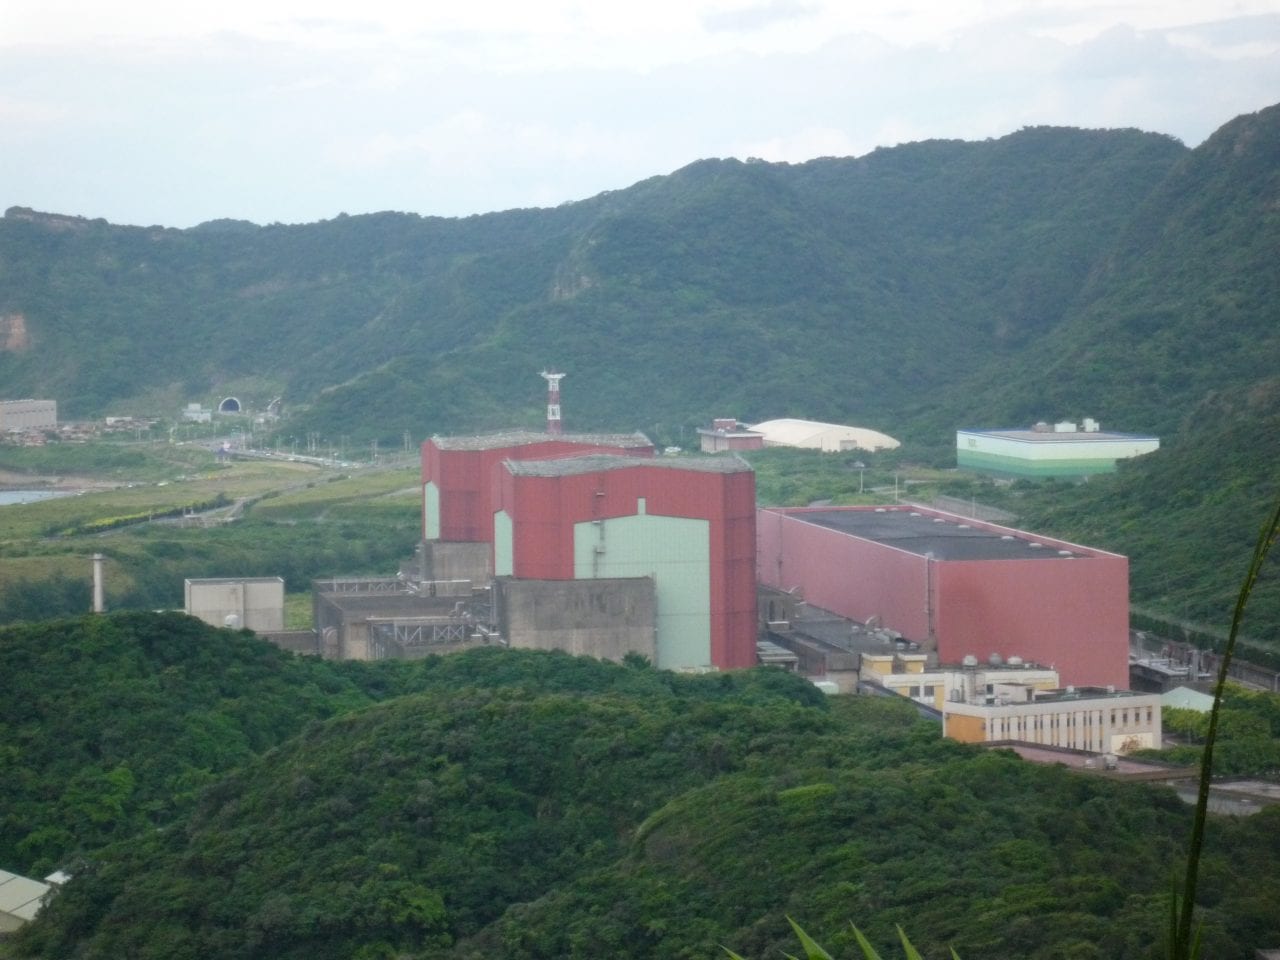 Taiwan Shuts Another Reactor as Part of Nuclear-Free Goal